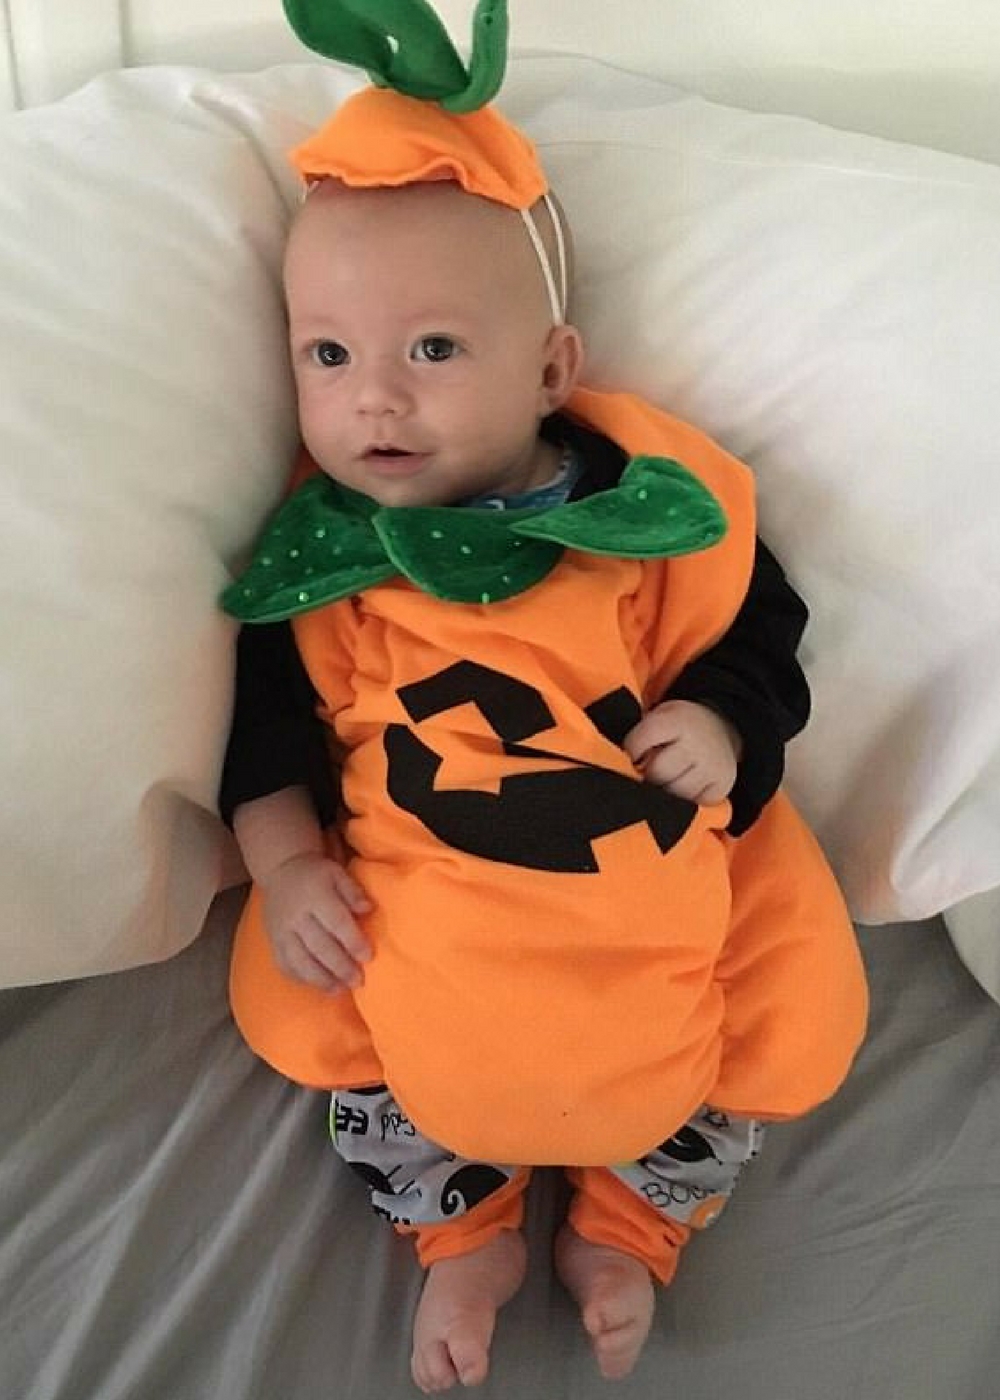 Mum shares genius Halloween costume hack for her son | That's Life ...